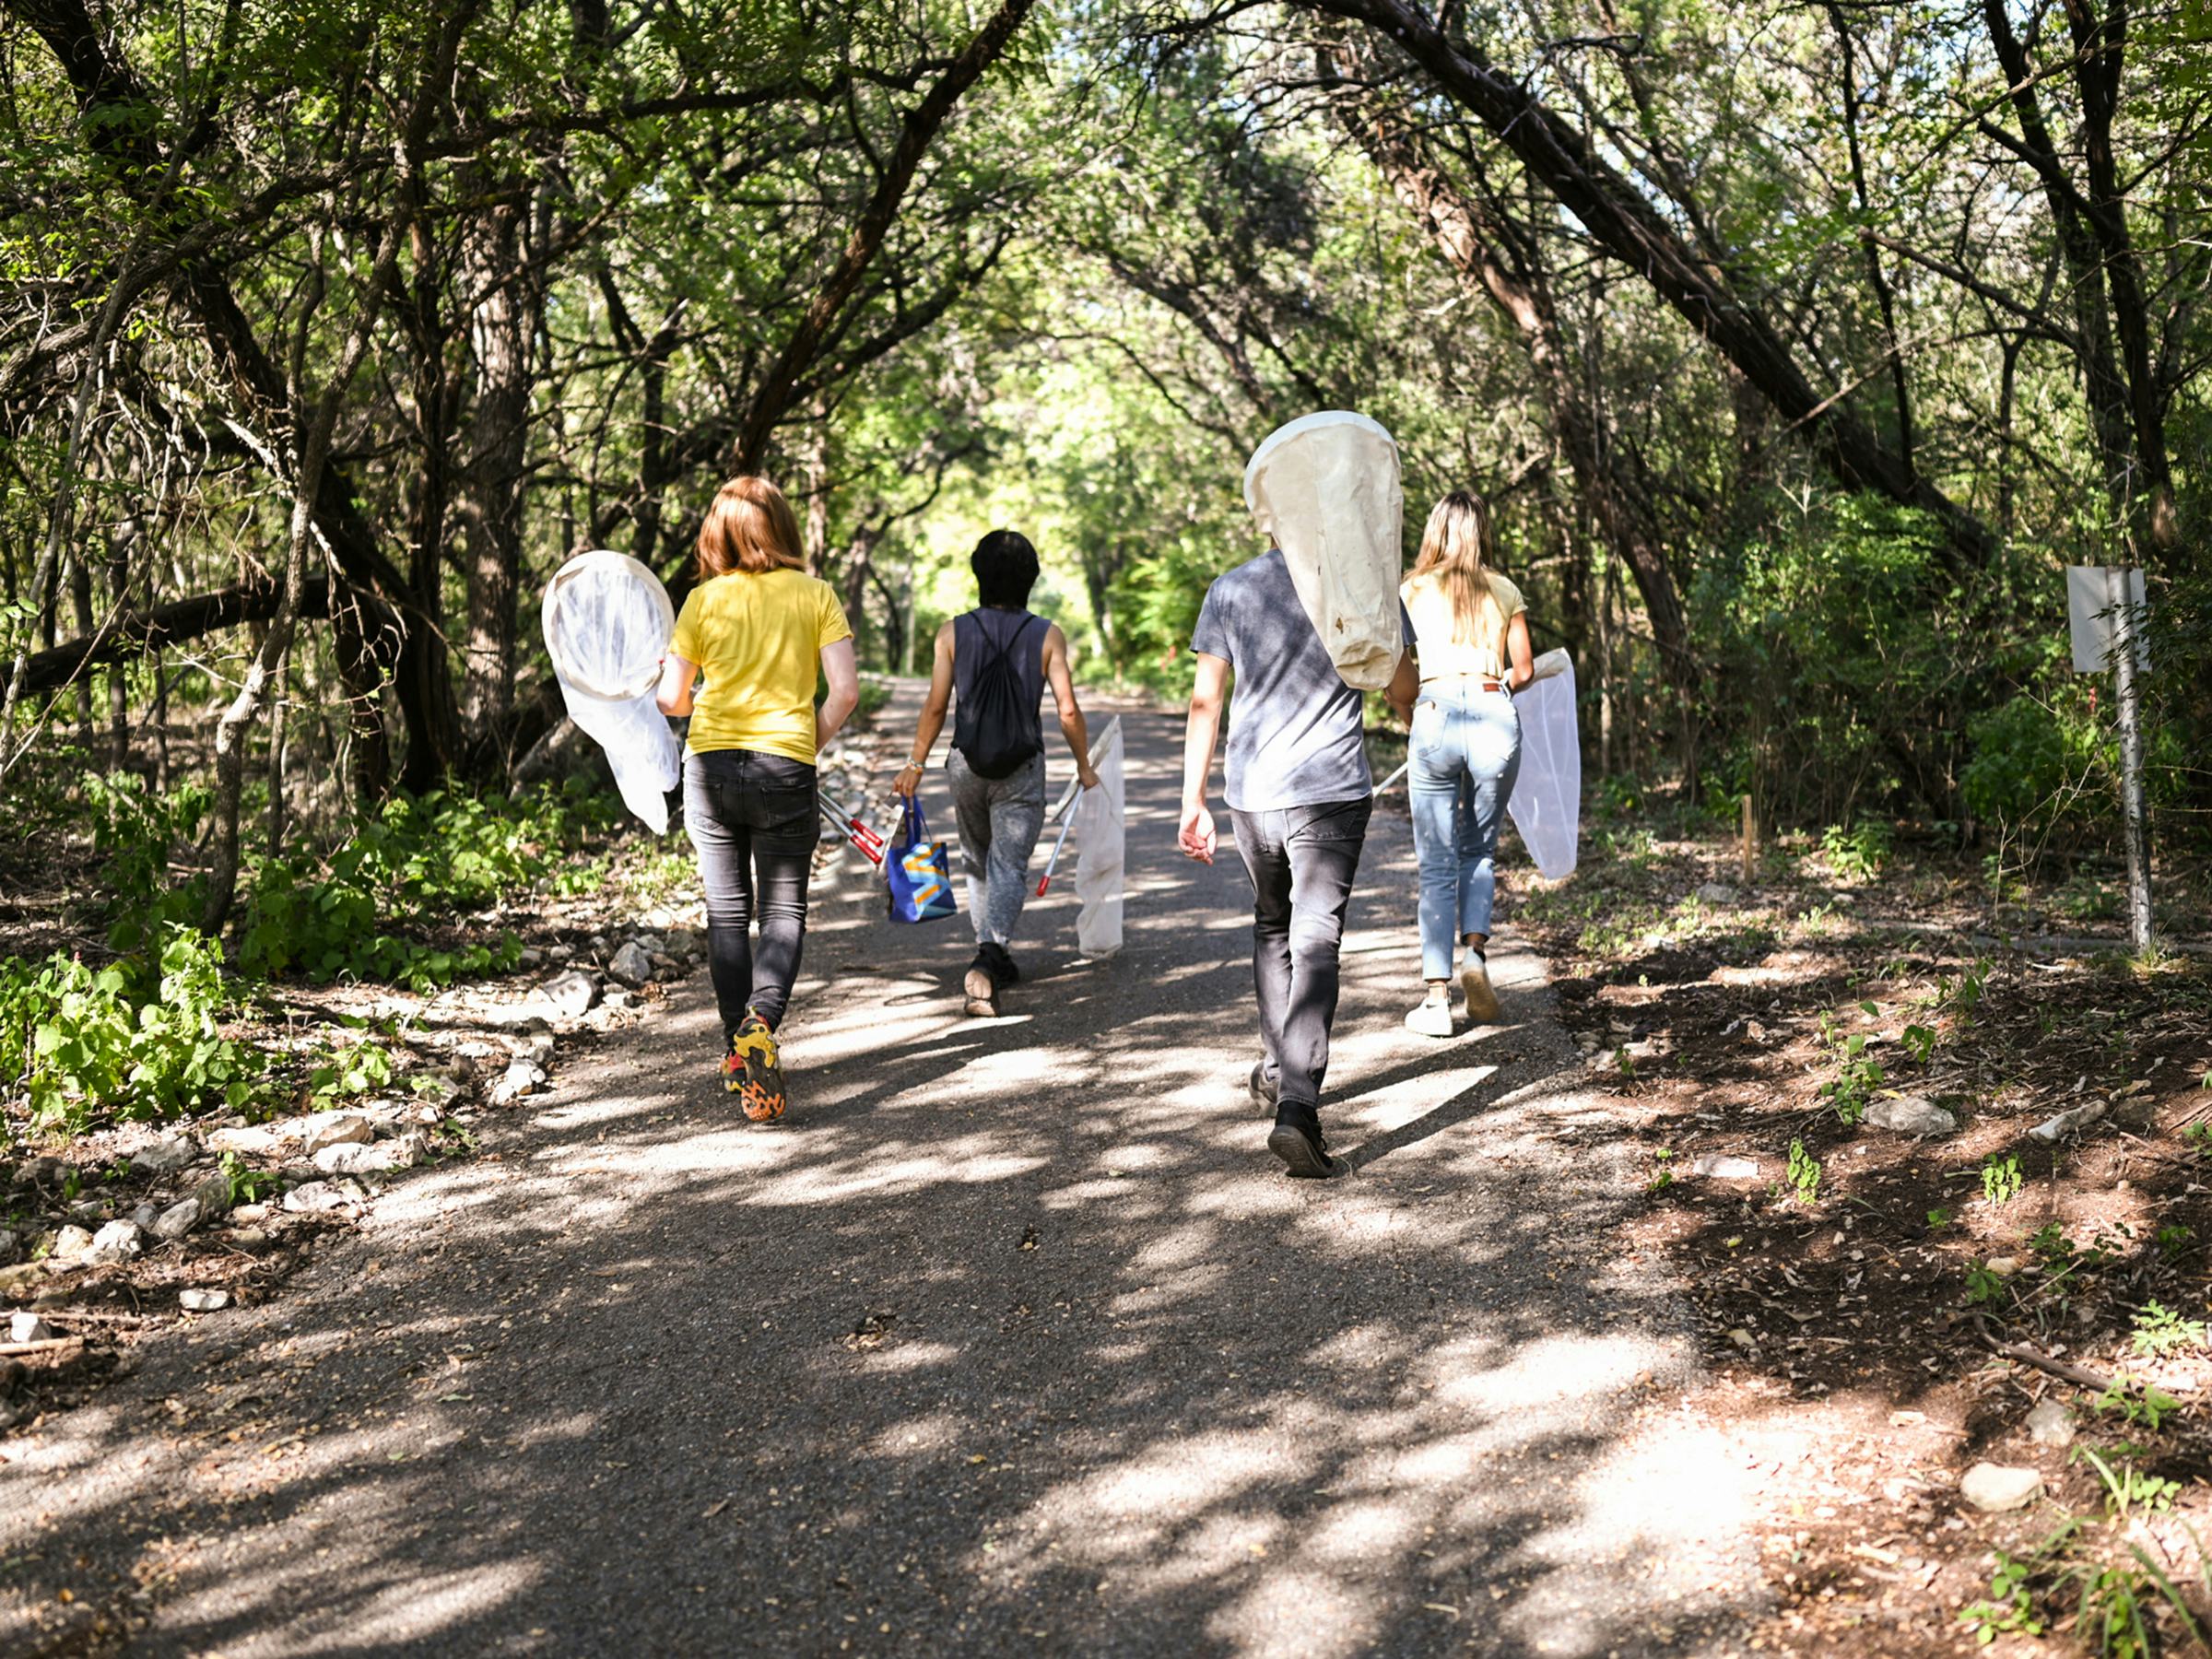 Students with butterfly nets walking down a wooeded path at Brackenridge Field Laboratory.